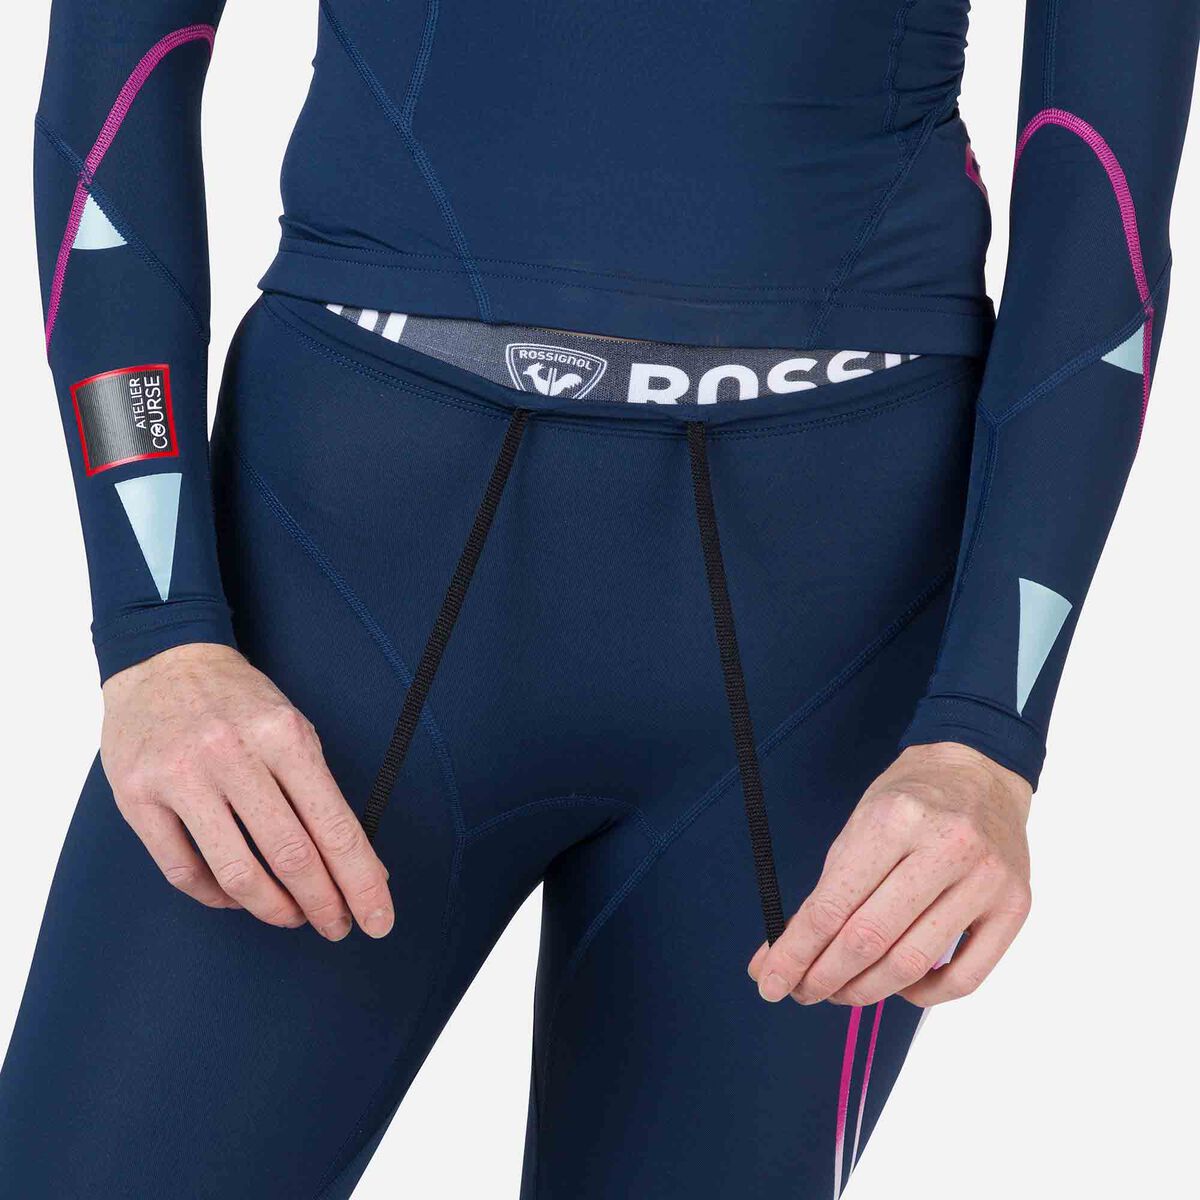 ROSSIGNOL-INFINI COMPRESSION RACE TIGHTS ONYX GREY - Cross-country